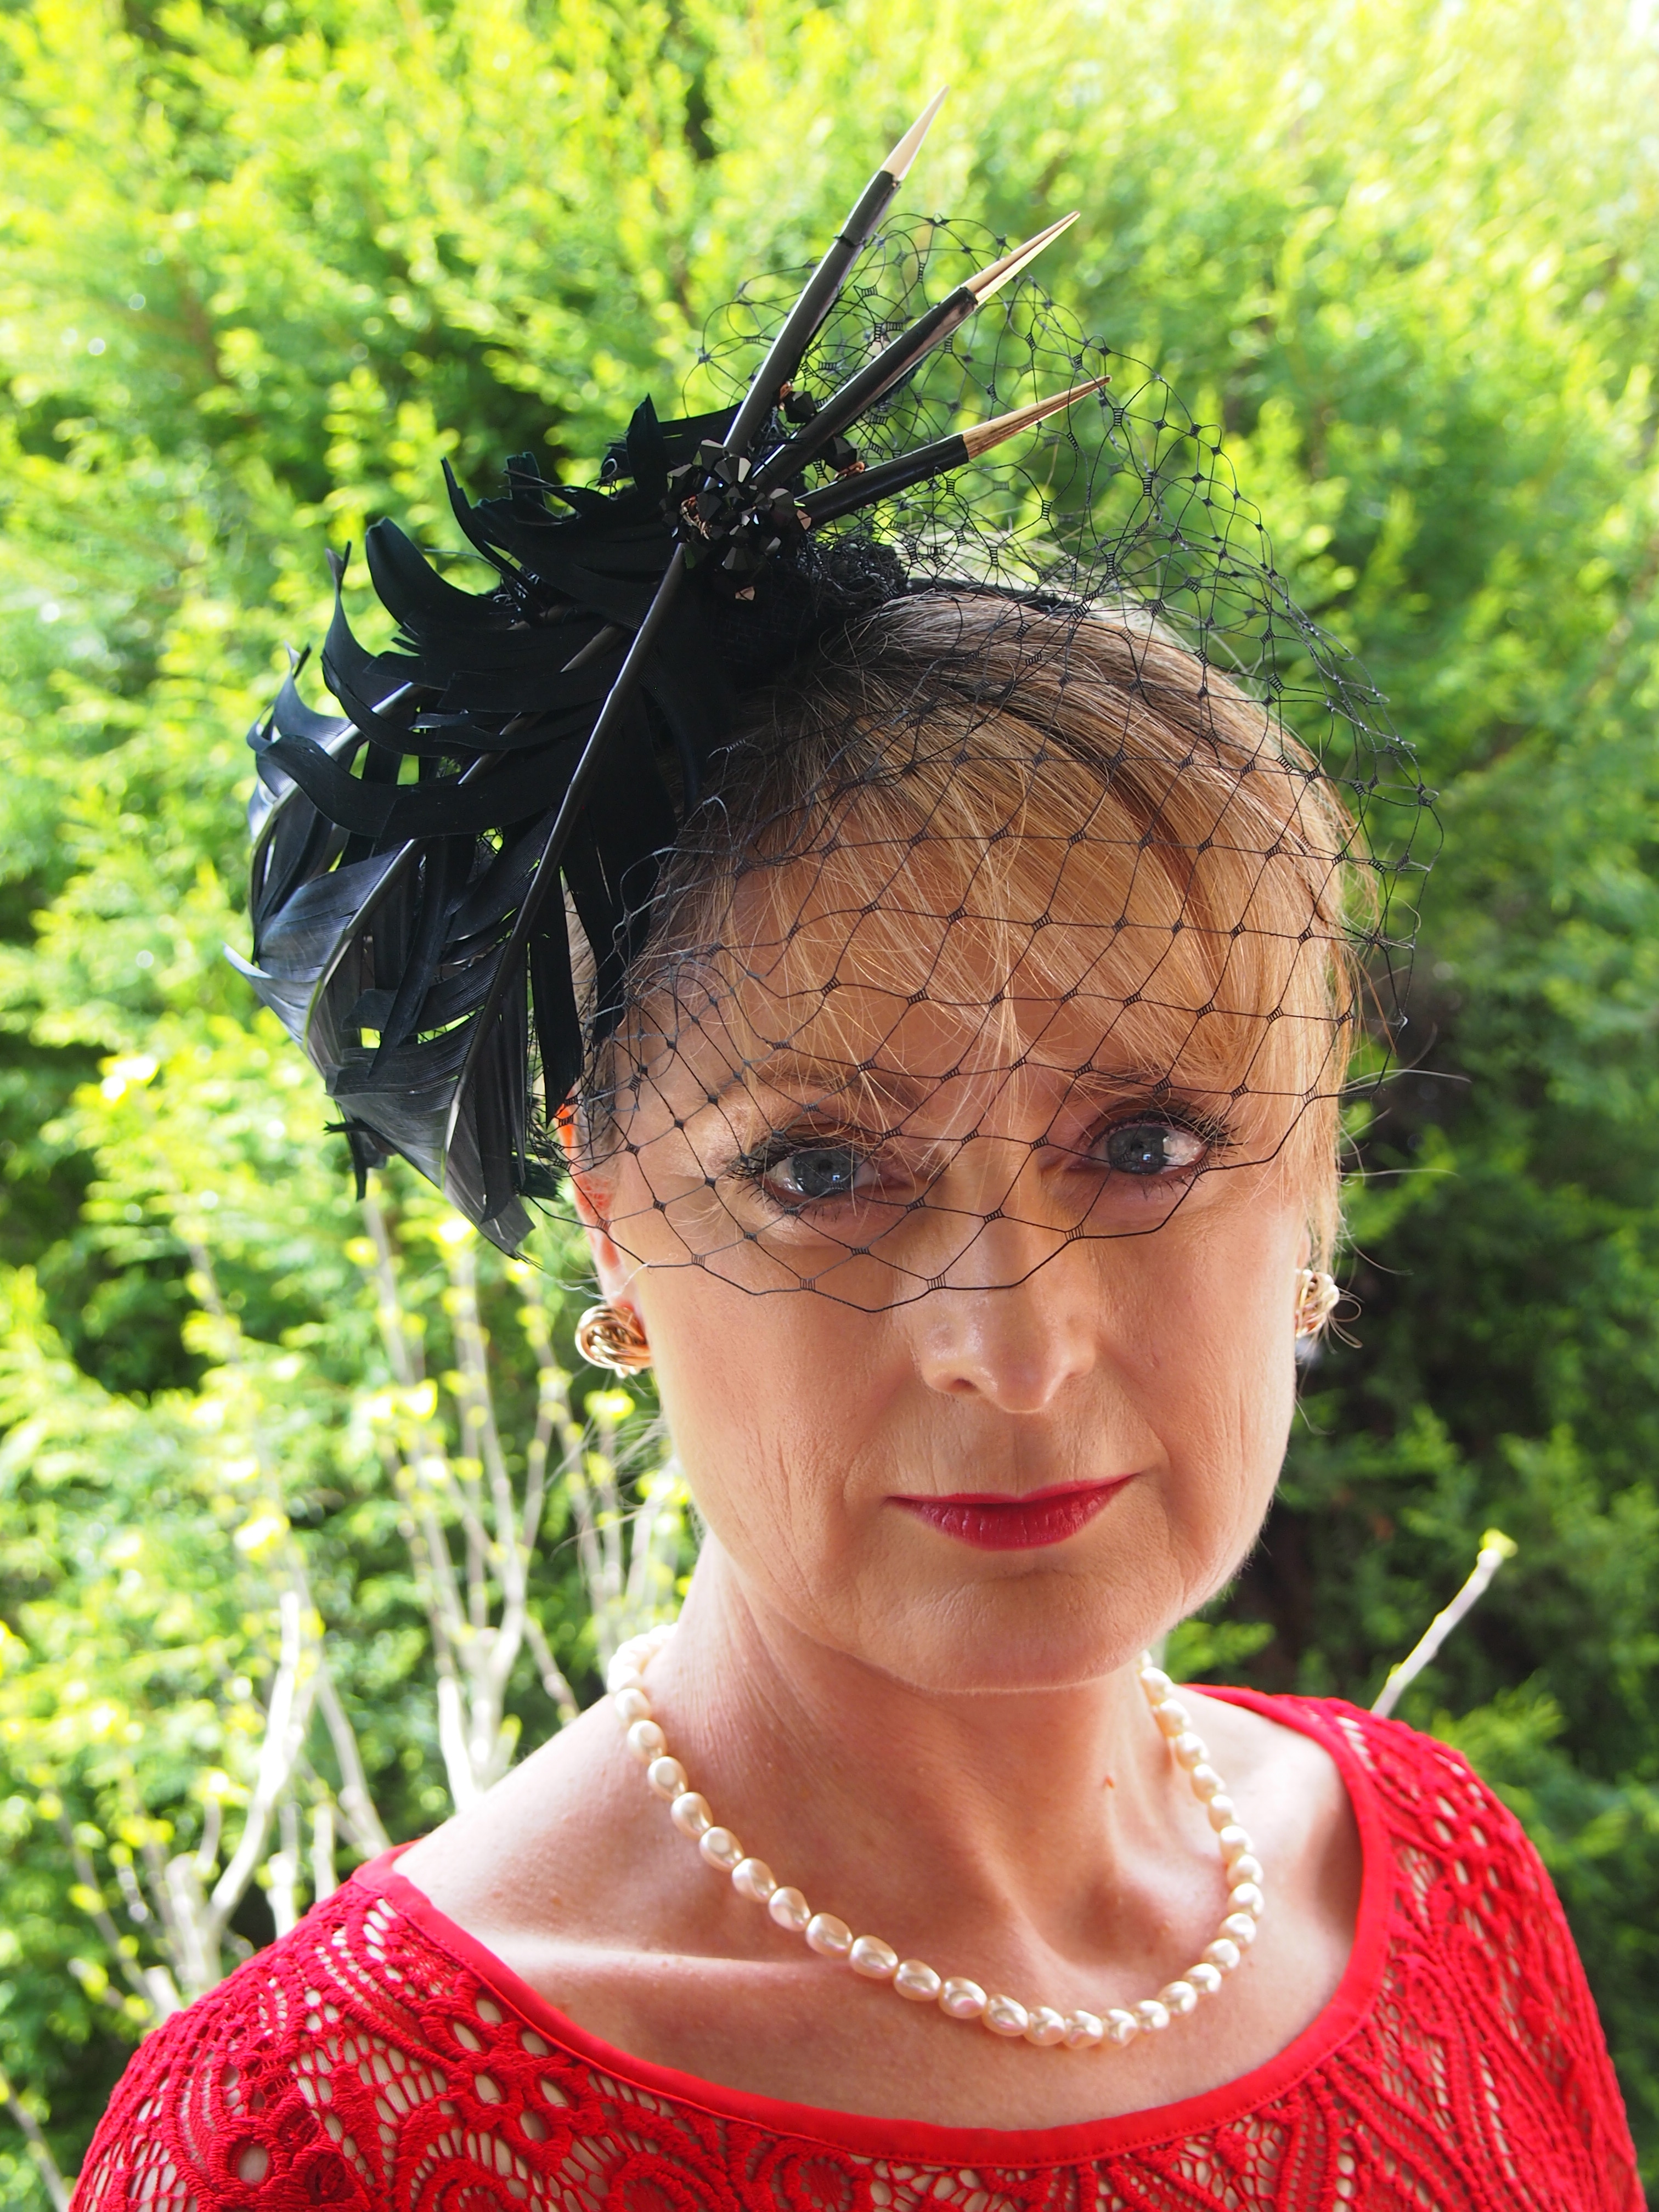 Trimmed Black Feathers with Gold tips and Lace Fascinator $275